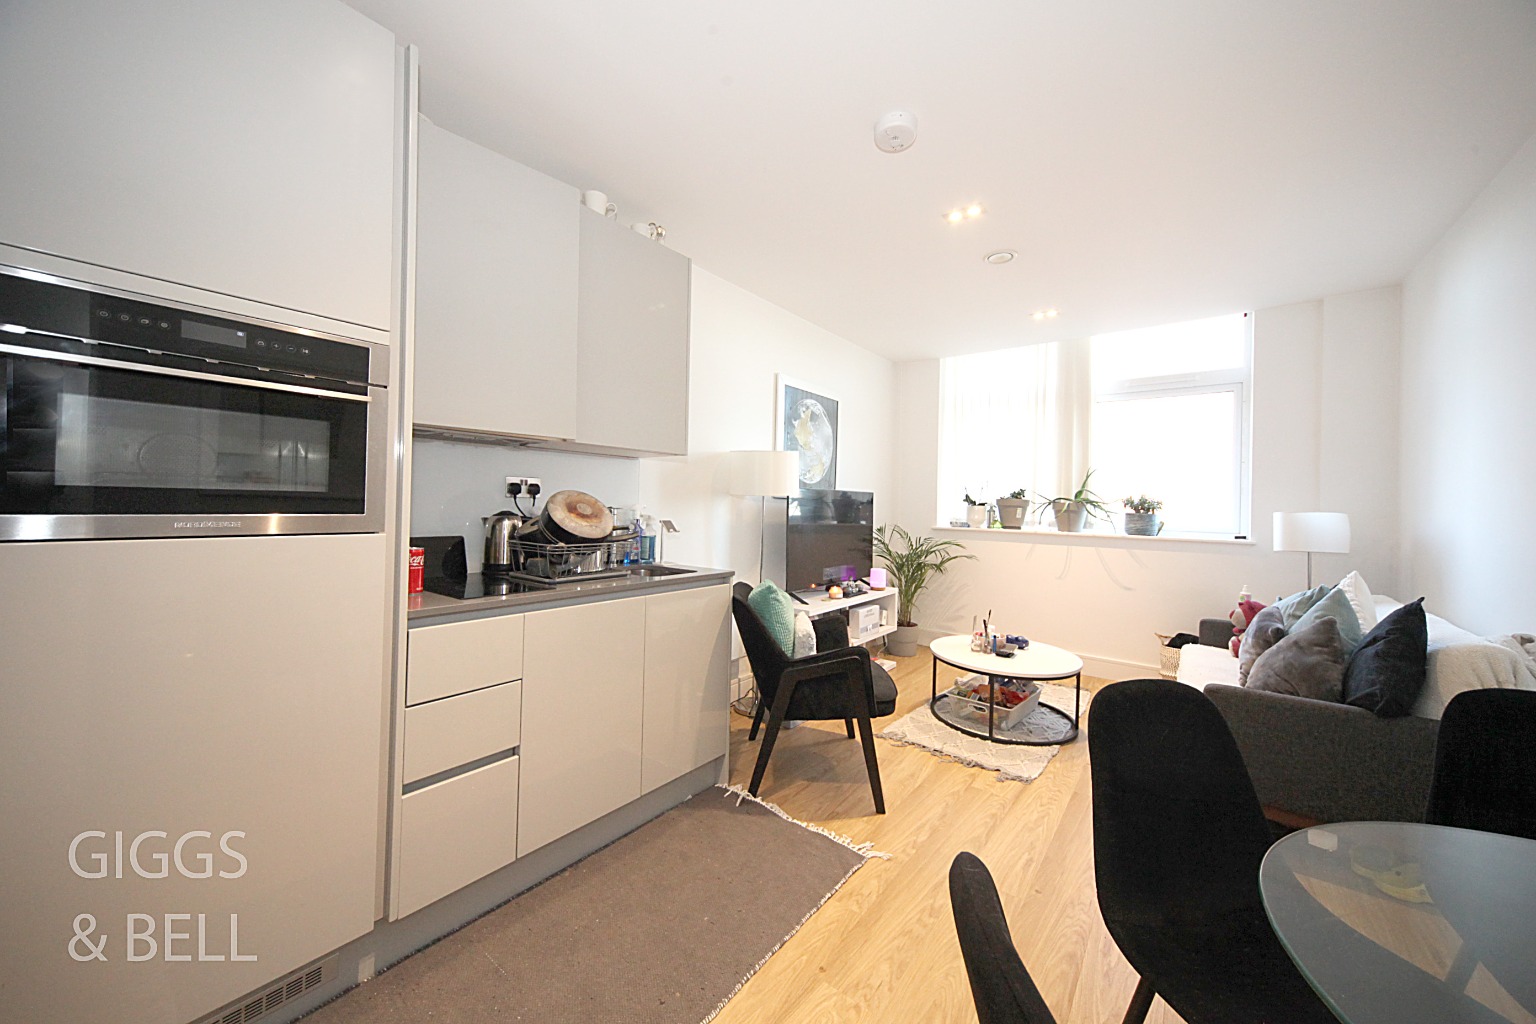 1 bed flat for sale in Laporte Way, Luton, LU4 